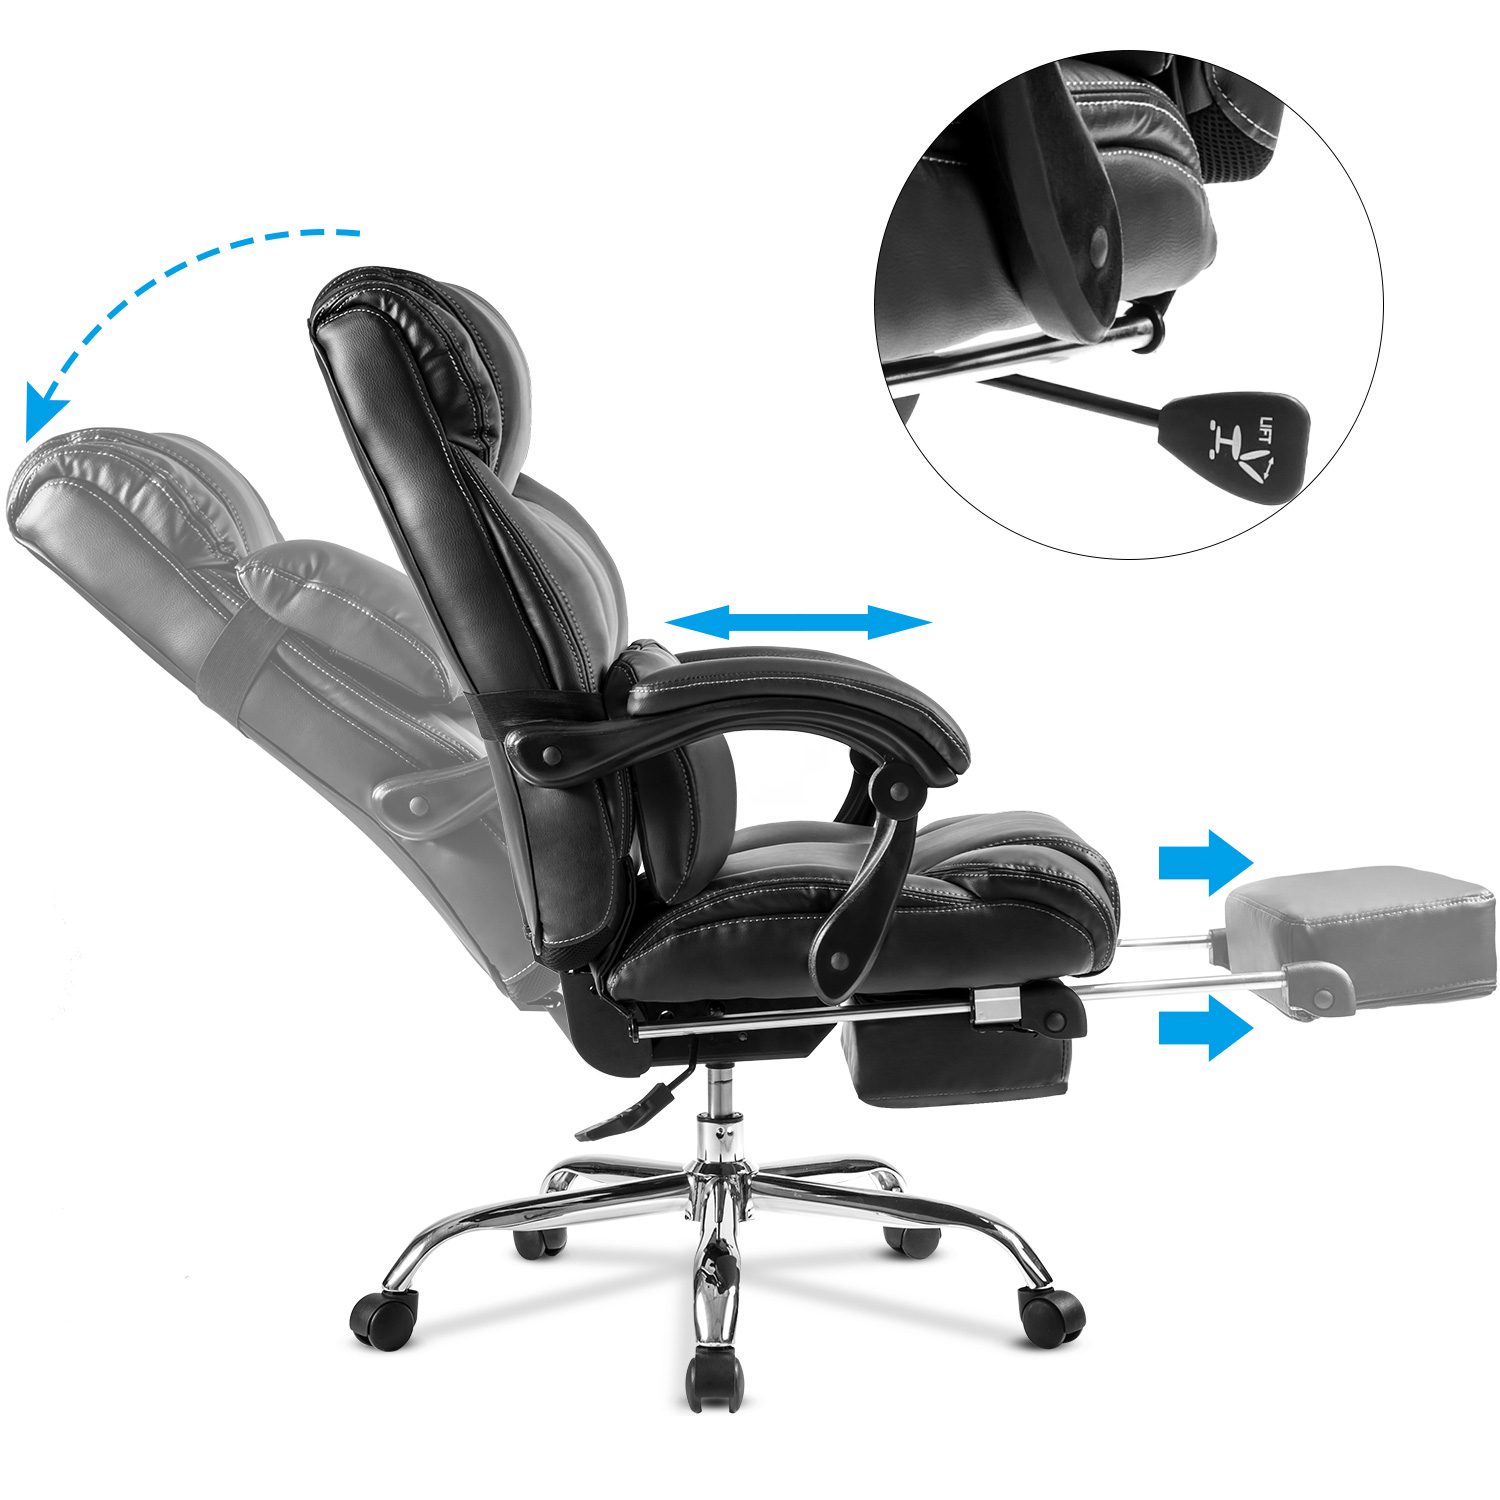 High Quality PU Leather Office Chair - PP191623AAB